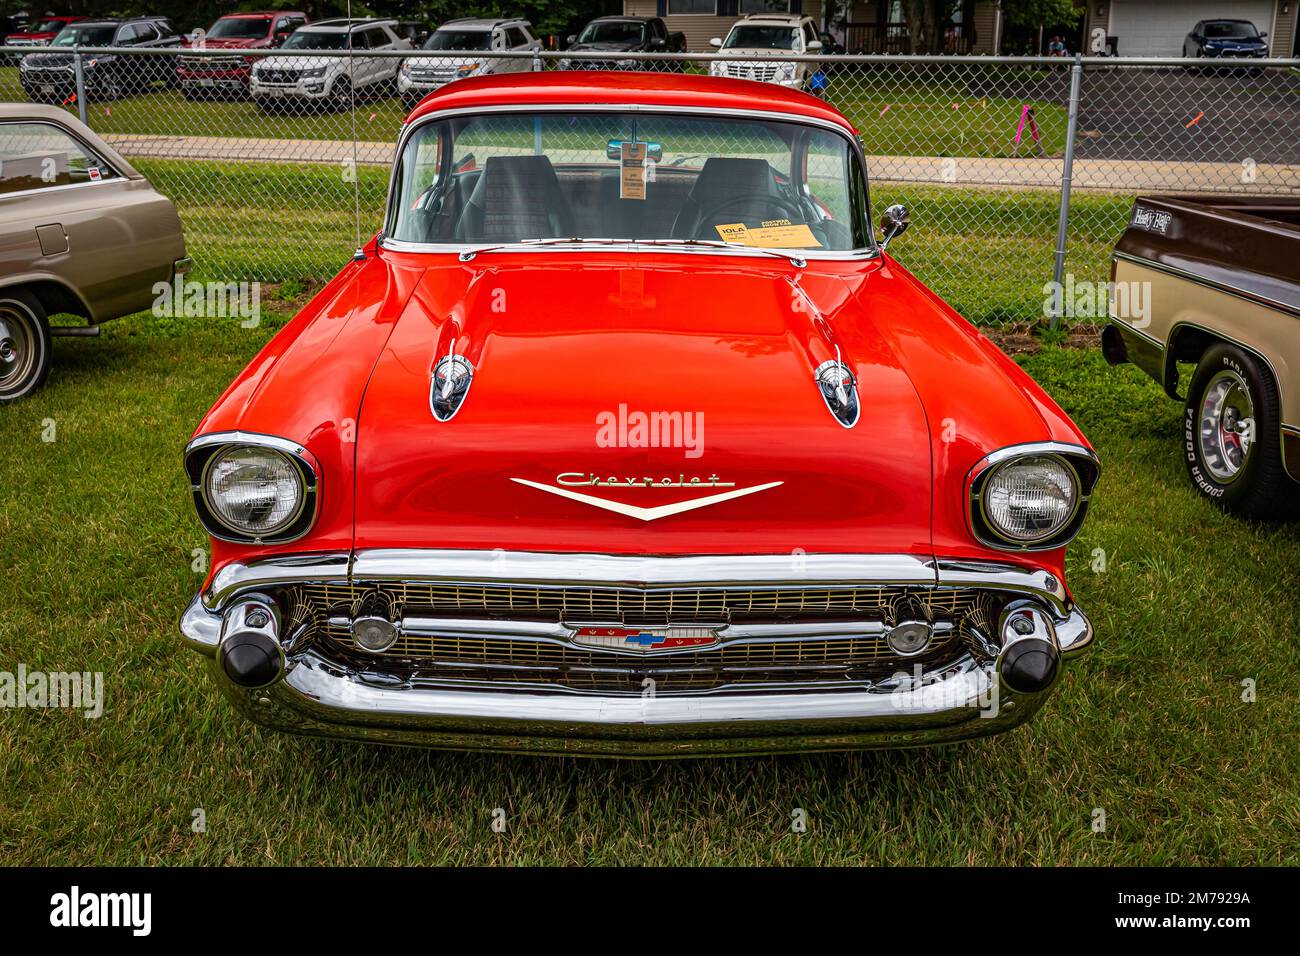 Iola, WI - July 07, 2022: High perspective front view of a 1957 Chevrolet BelAir 2 Door Hardtop at a local car show. Stock Photo